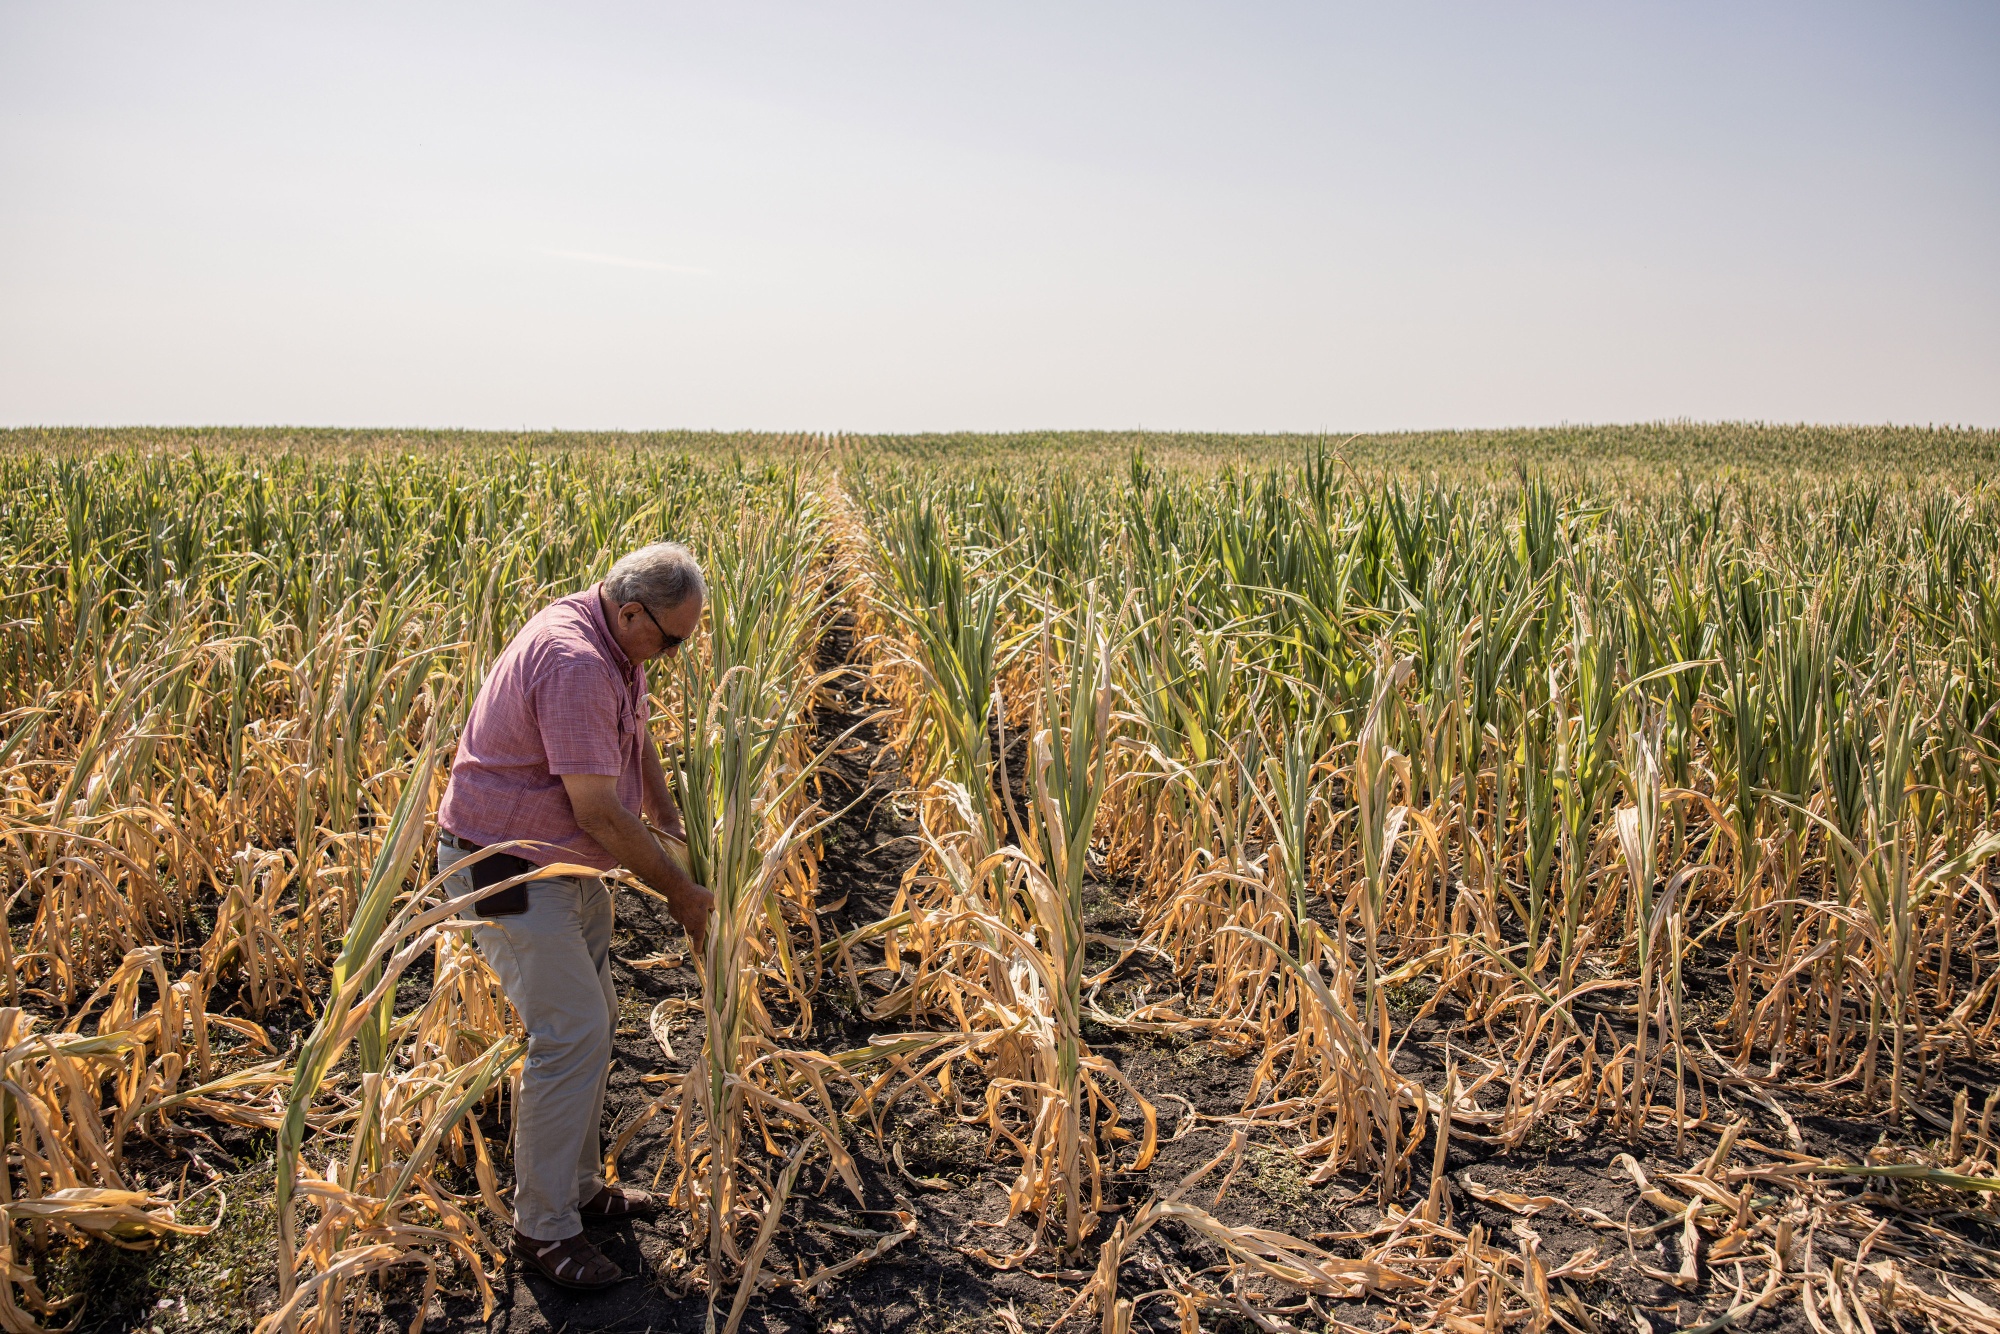 A farmer inspects scorched corn in a field near Hodmezovasarhely, Hungary, on Aug. 3. 